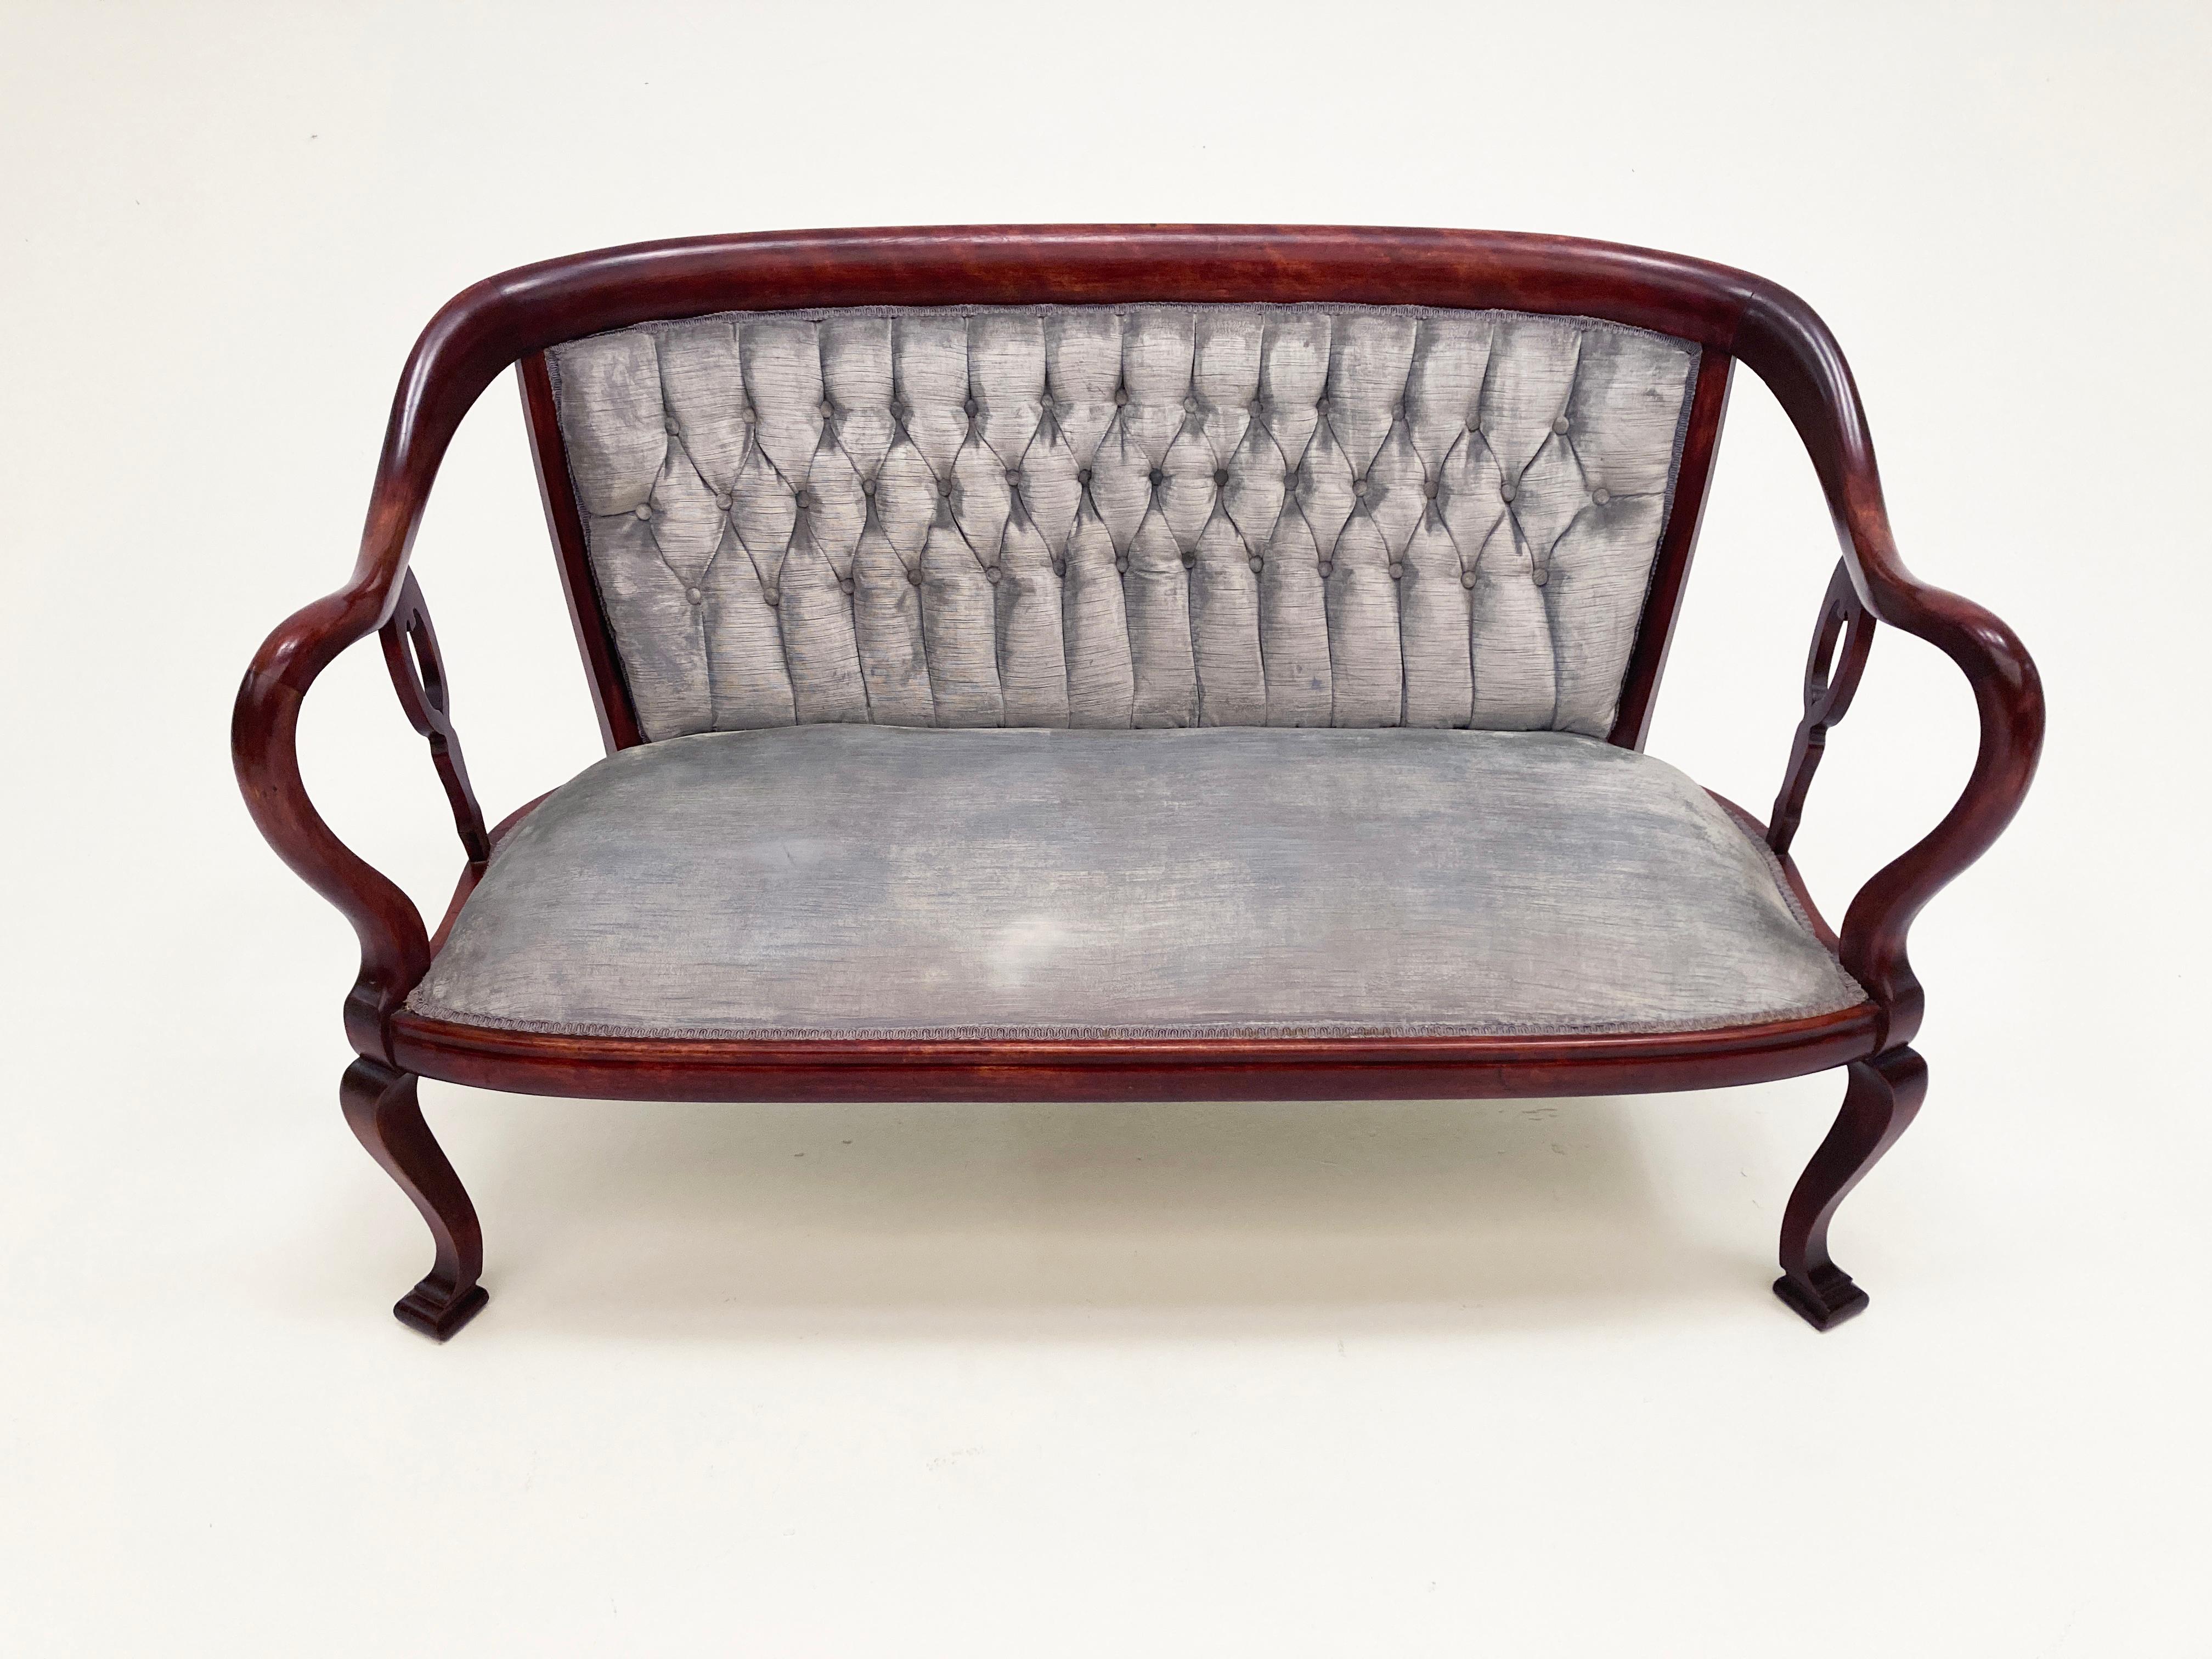 This elegant Georgian style trio is English made, done in a rich mahogany with beautiful curves in the design of the arms and back. The settee is covered in what appears to be the original velvet placed on the piece at its creation in the late